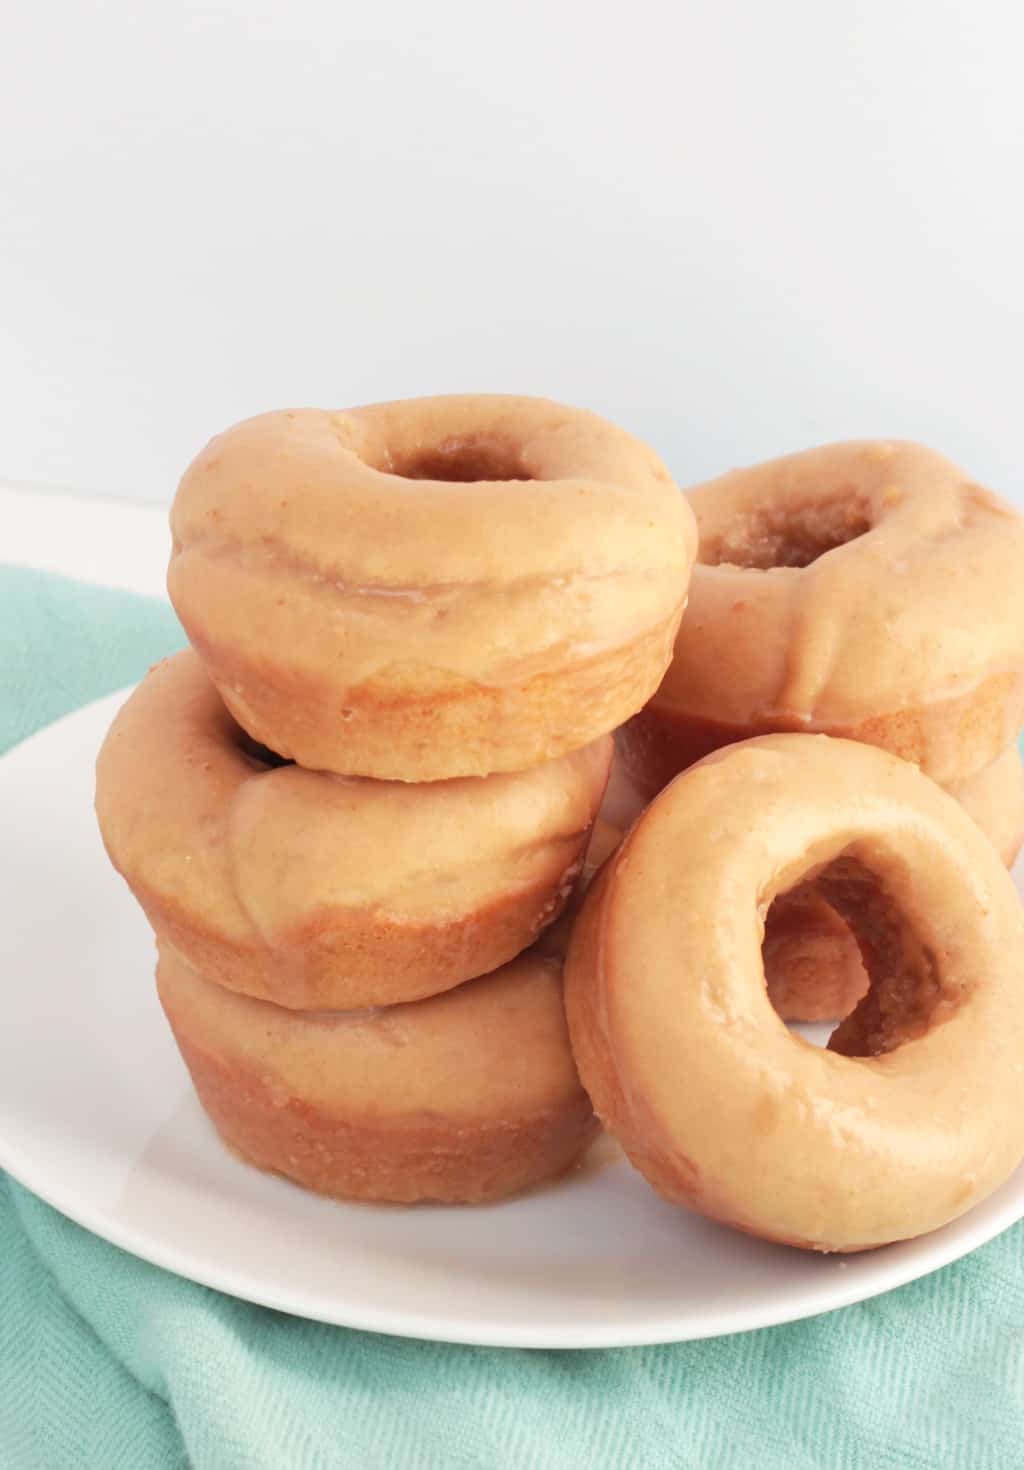 https://prettyprovidence.com/wp-content/uploads/2013/05/cookie-butter-donuts-without-pan.jpg